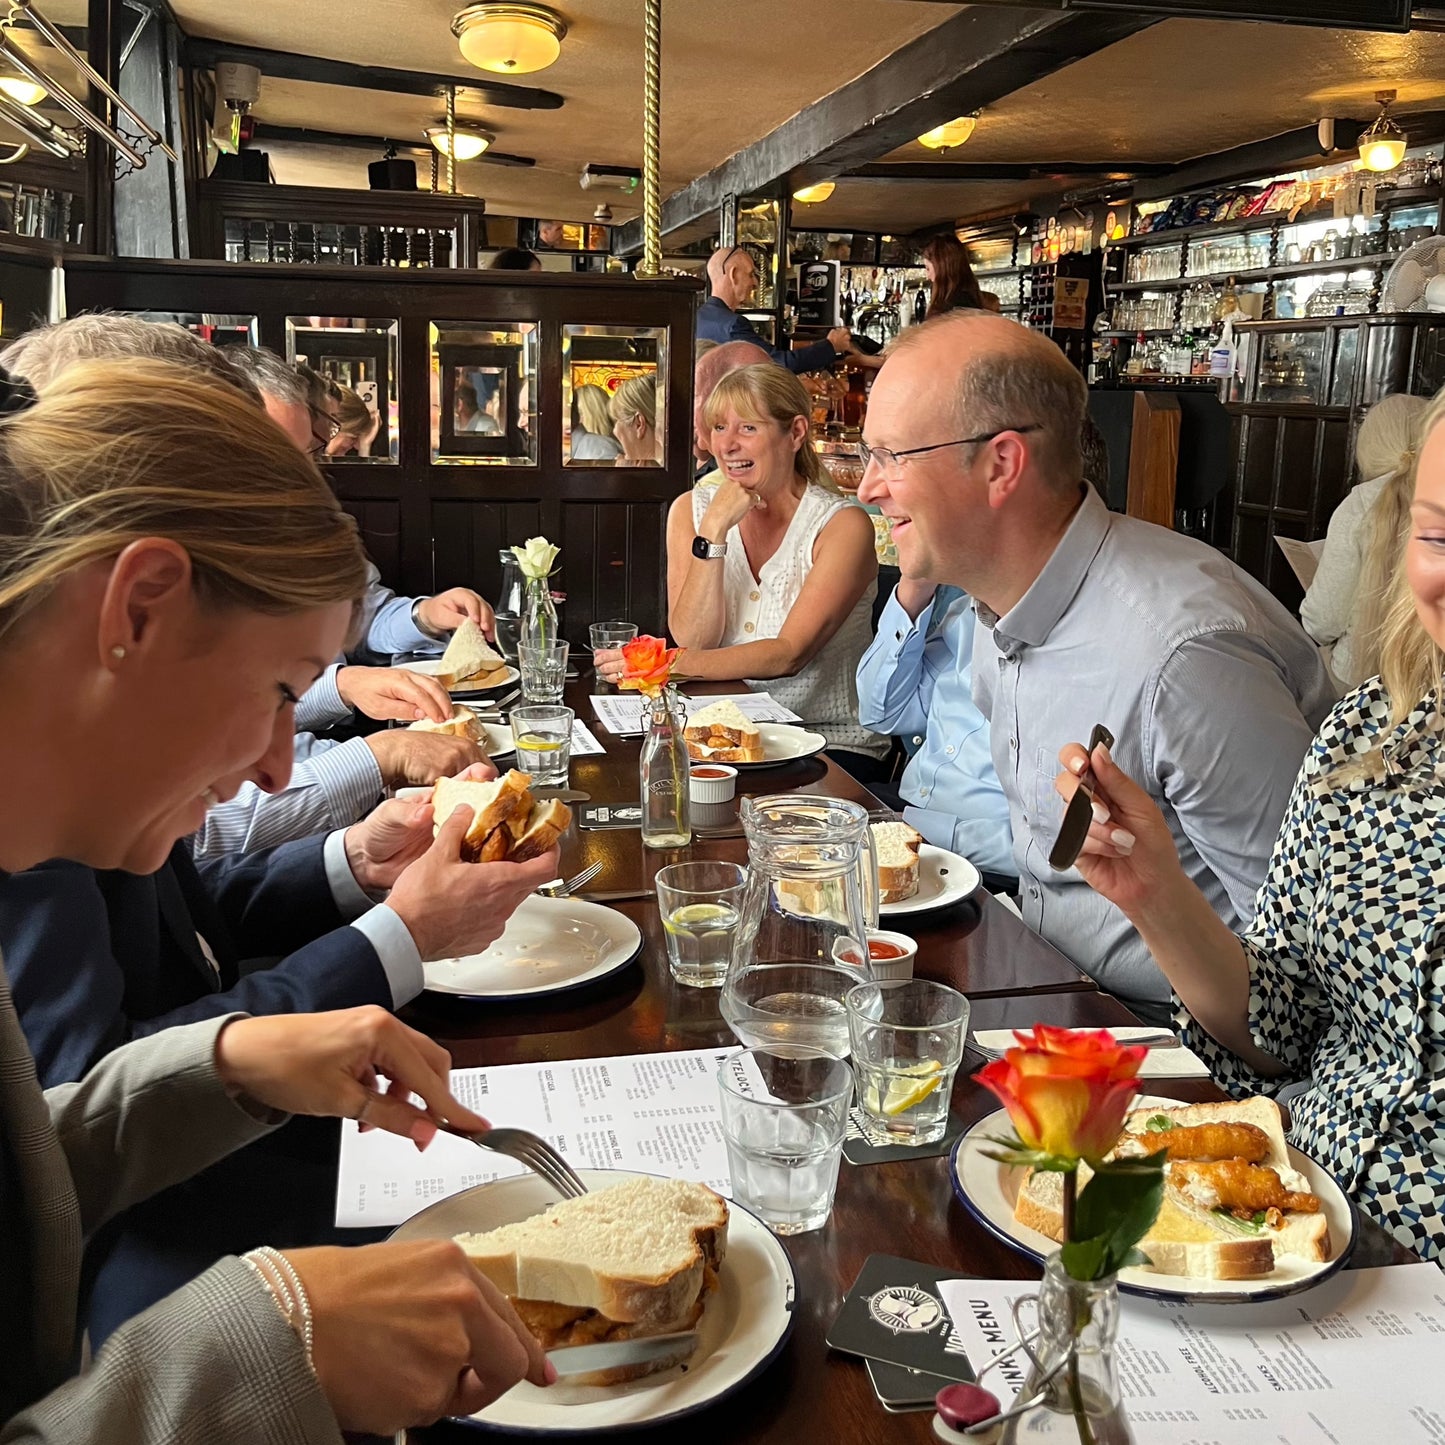 Networking Food Tour - 10th April 12-2pm